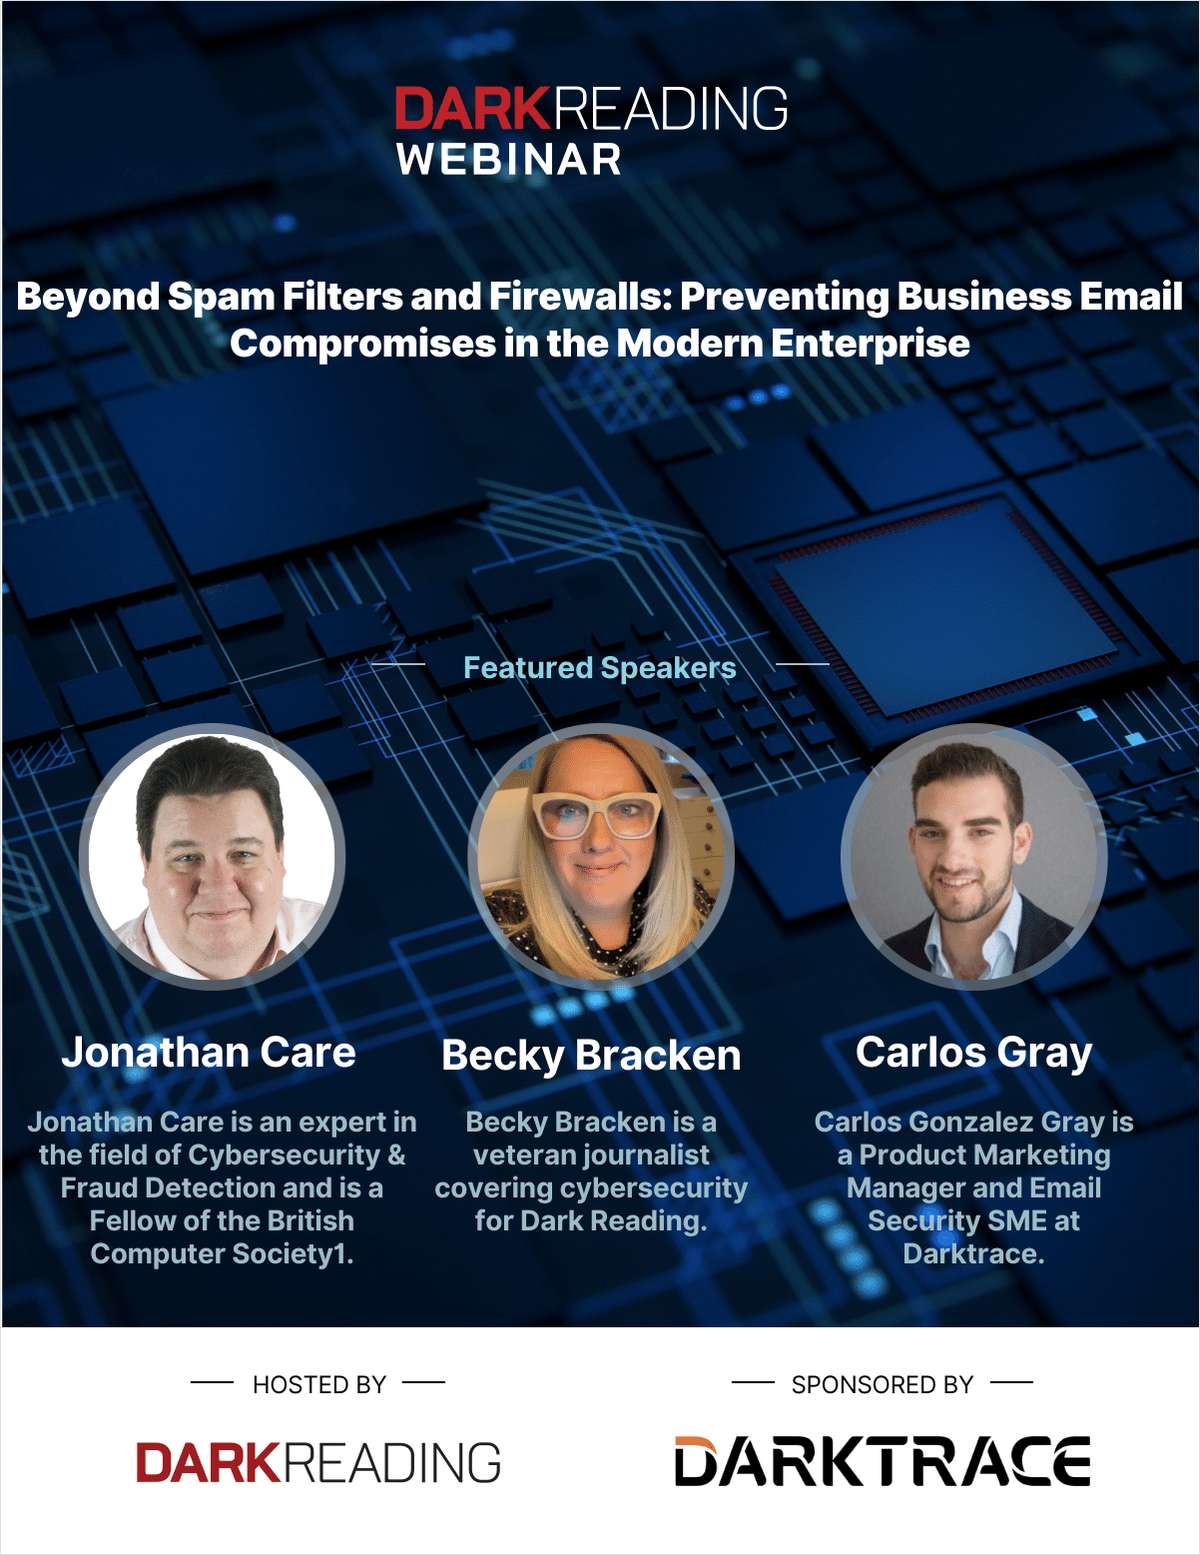 Beyond Spam Filters and Firewalls: Preventing Business Email Compromises in the Modern Enterprise